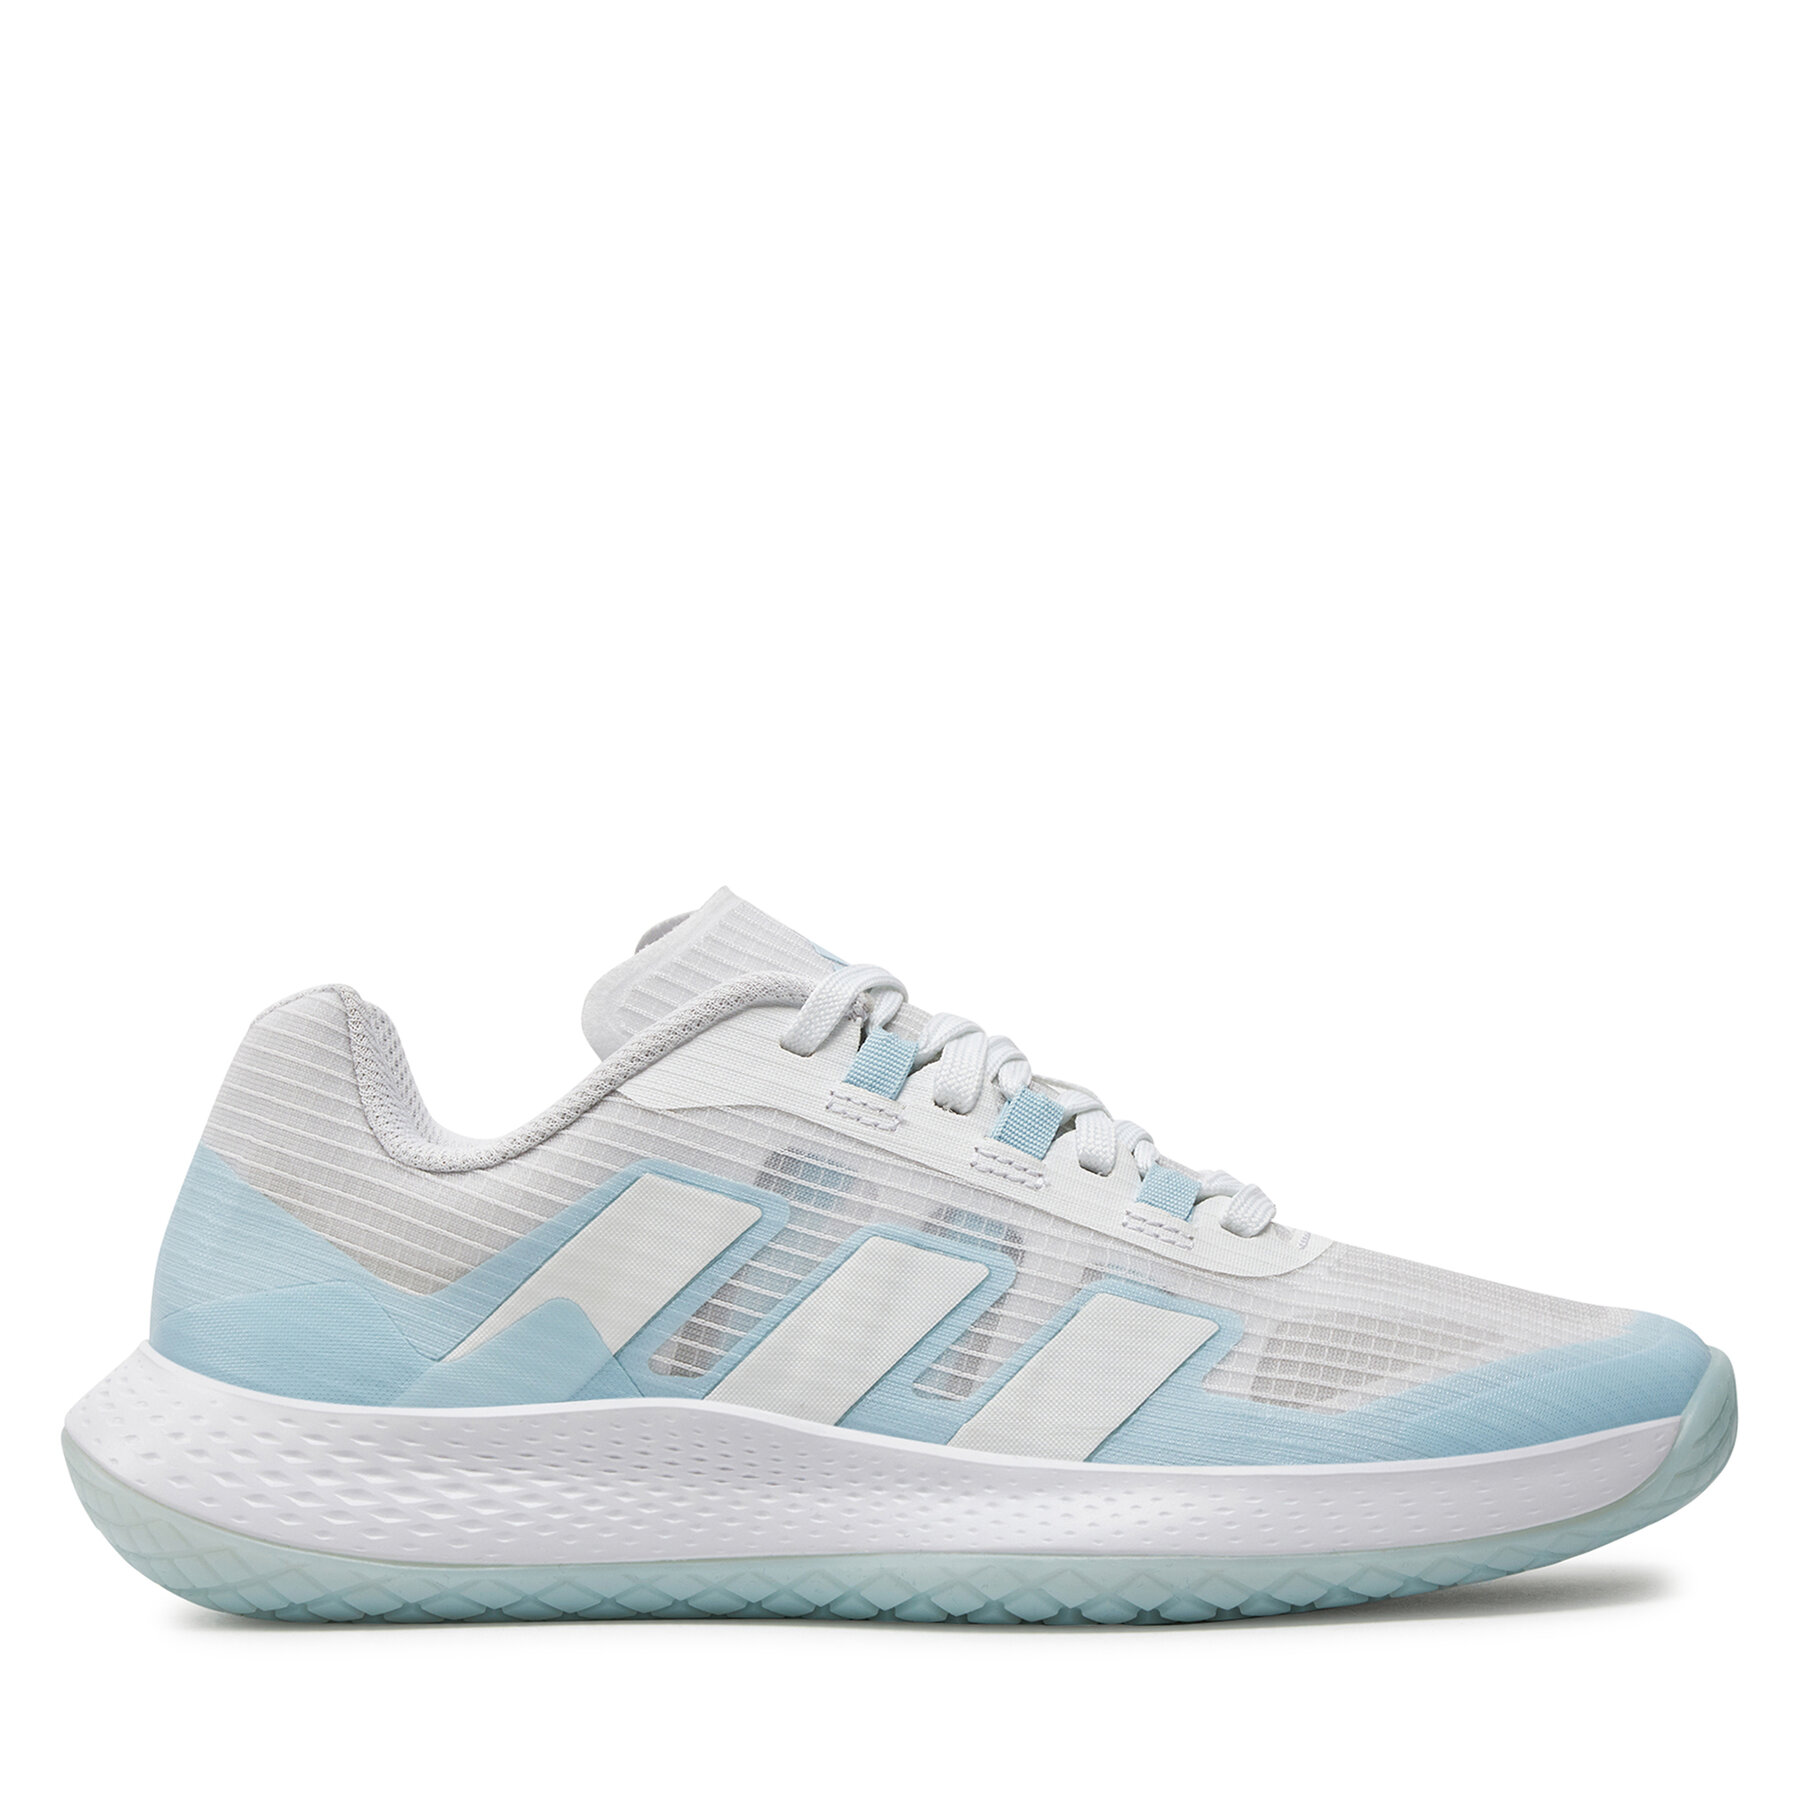 Adidas Forcebounce Women cloud white/cloud white/ice blue (ID7765) - Zapatillas indoor